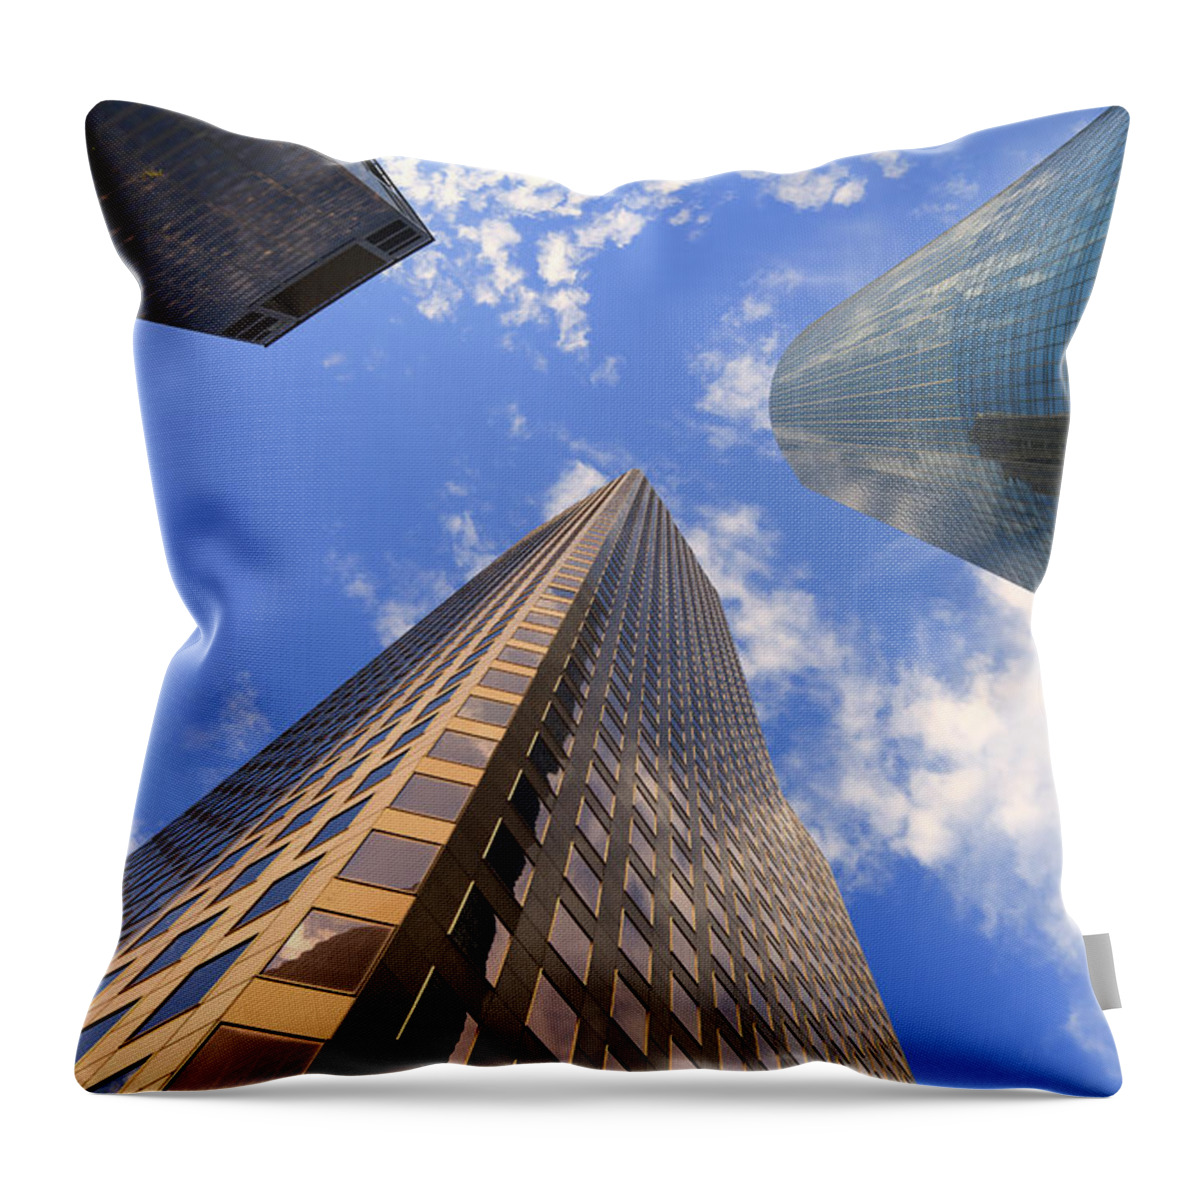 Architecture Throw Pillow featuring the photograph Skyscrapers by Raul Rodriguez